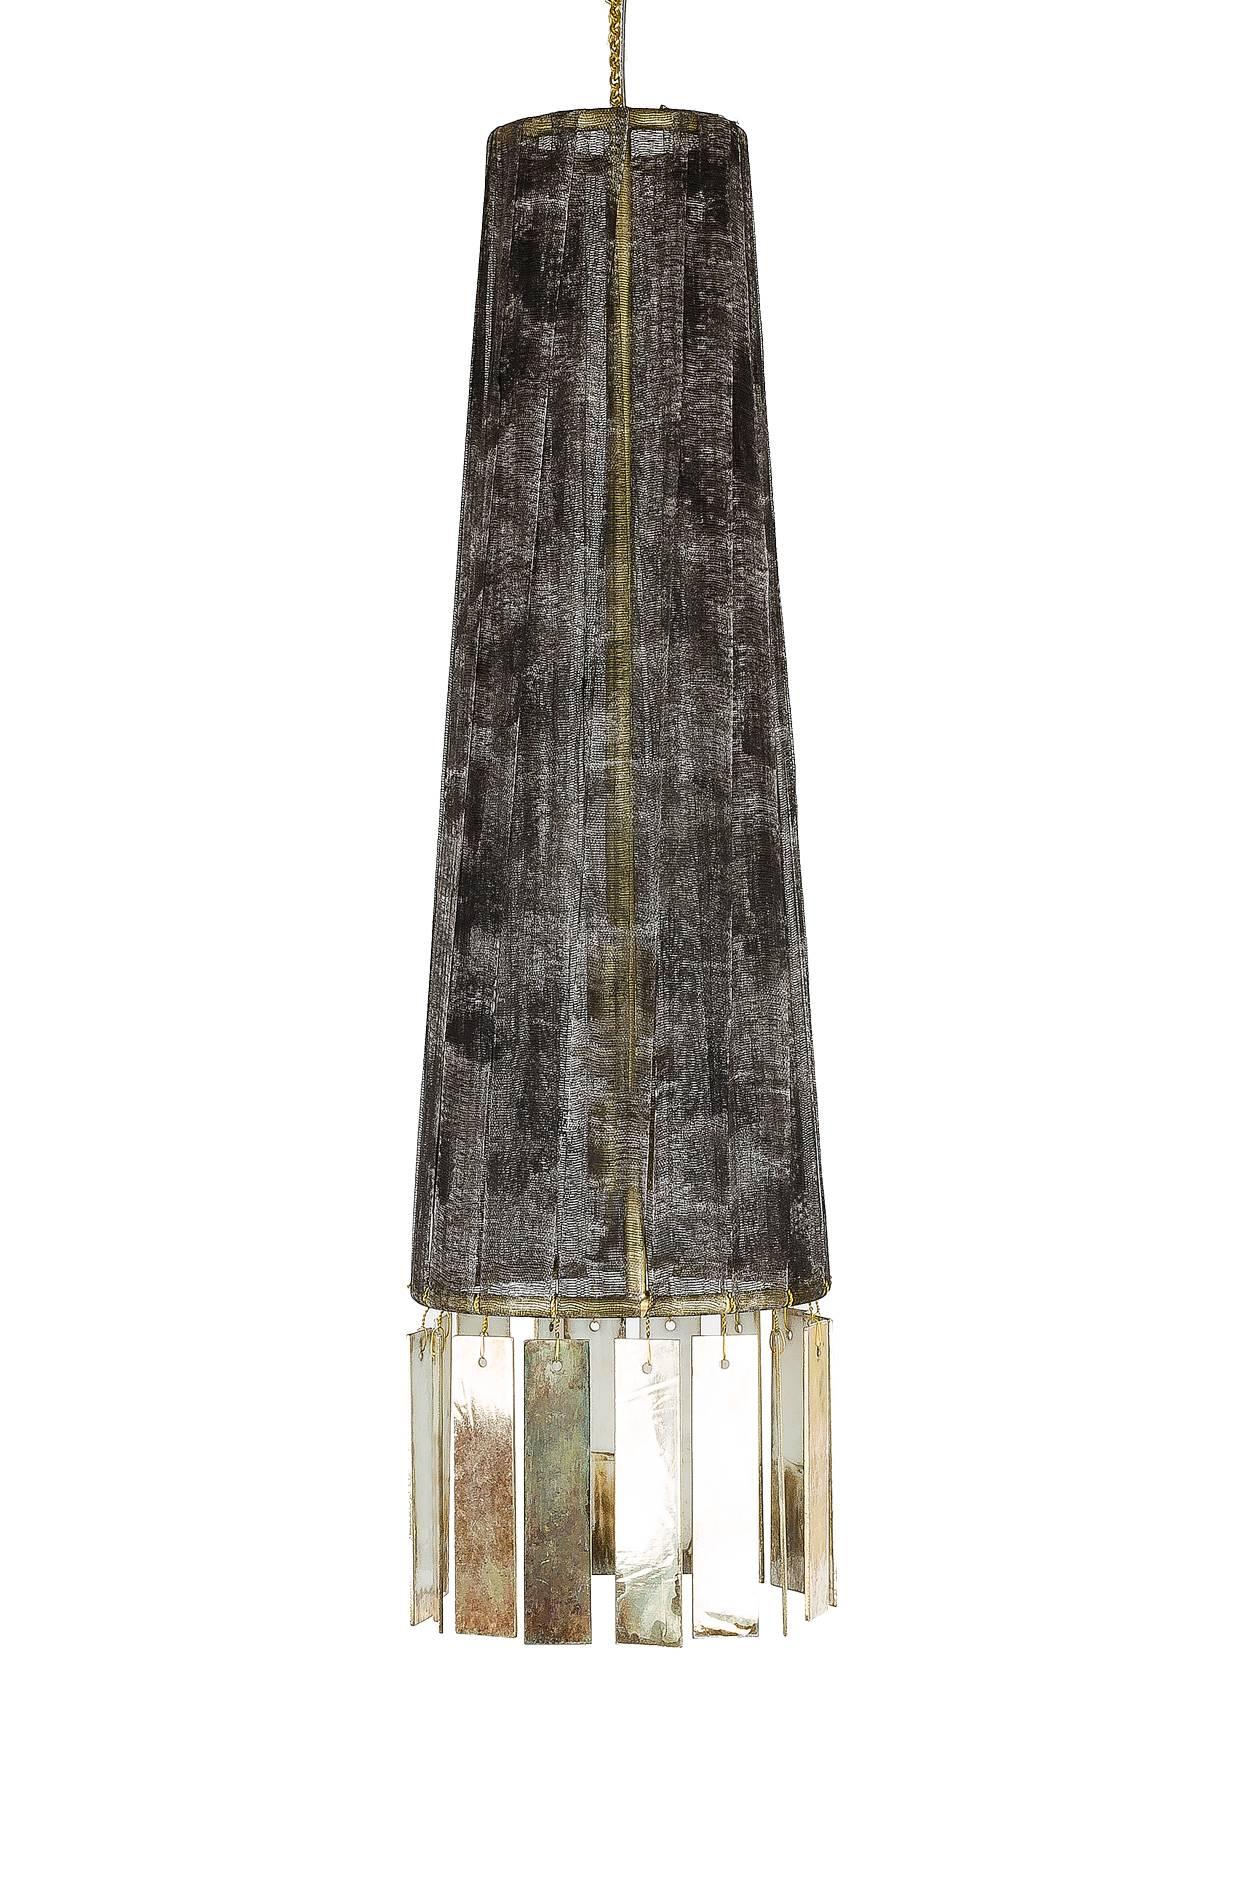 Magic is a hanging lamp entirely handmade and manufactured by hand, in Tuscany, Italy.
The lampshade body of this light object is in brass with mat finish.
The lampshade is wrapped with hand-painted cotton gauze strips, it is wrapped by hand